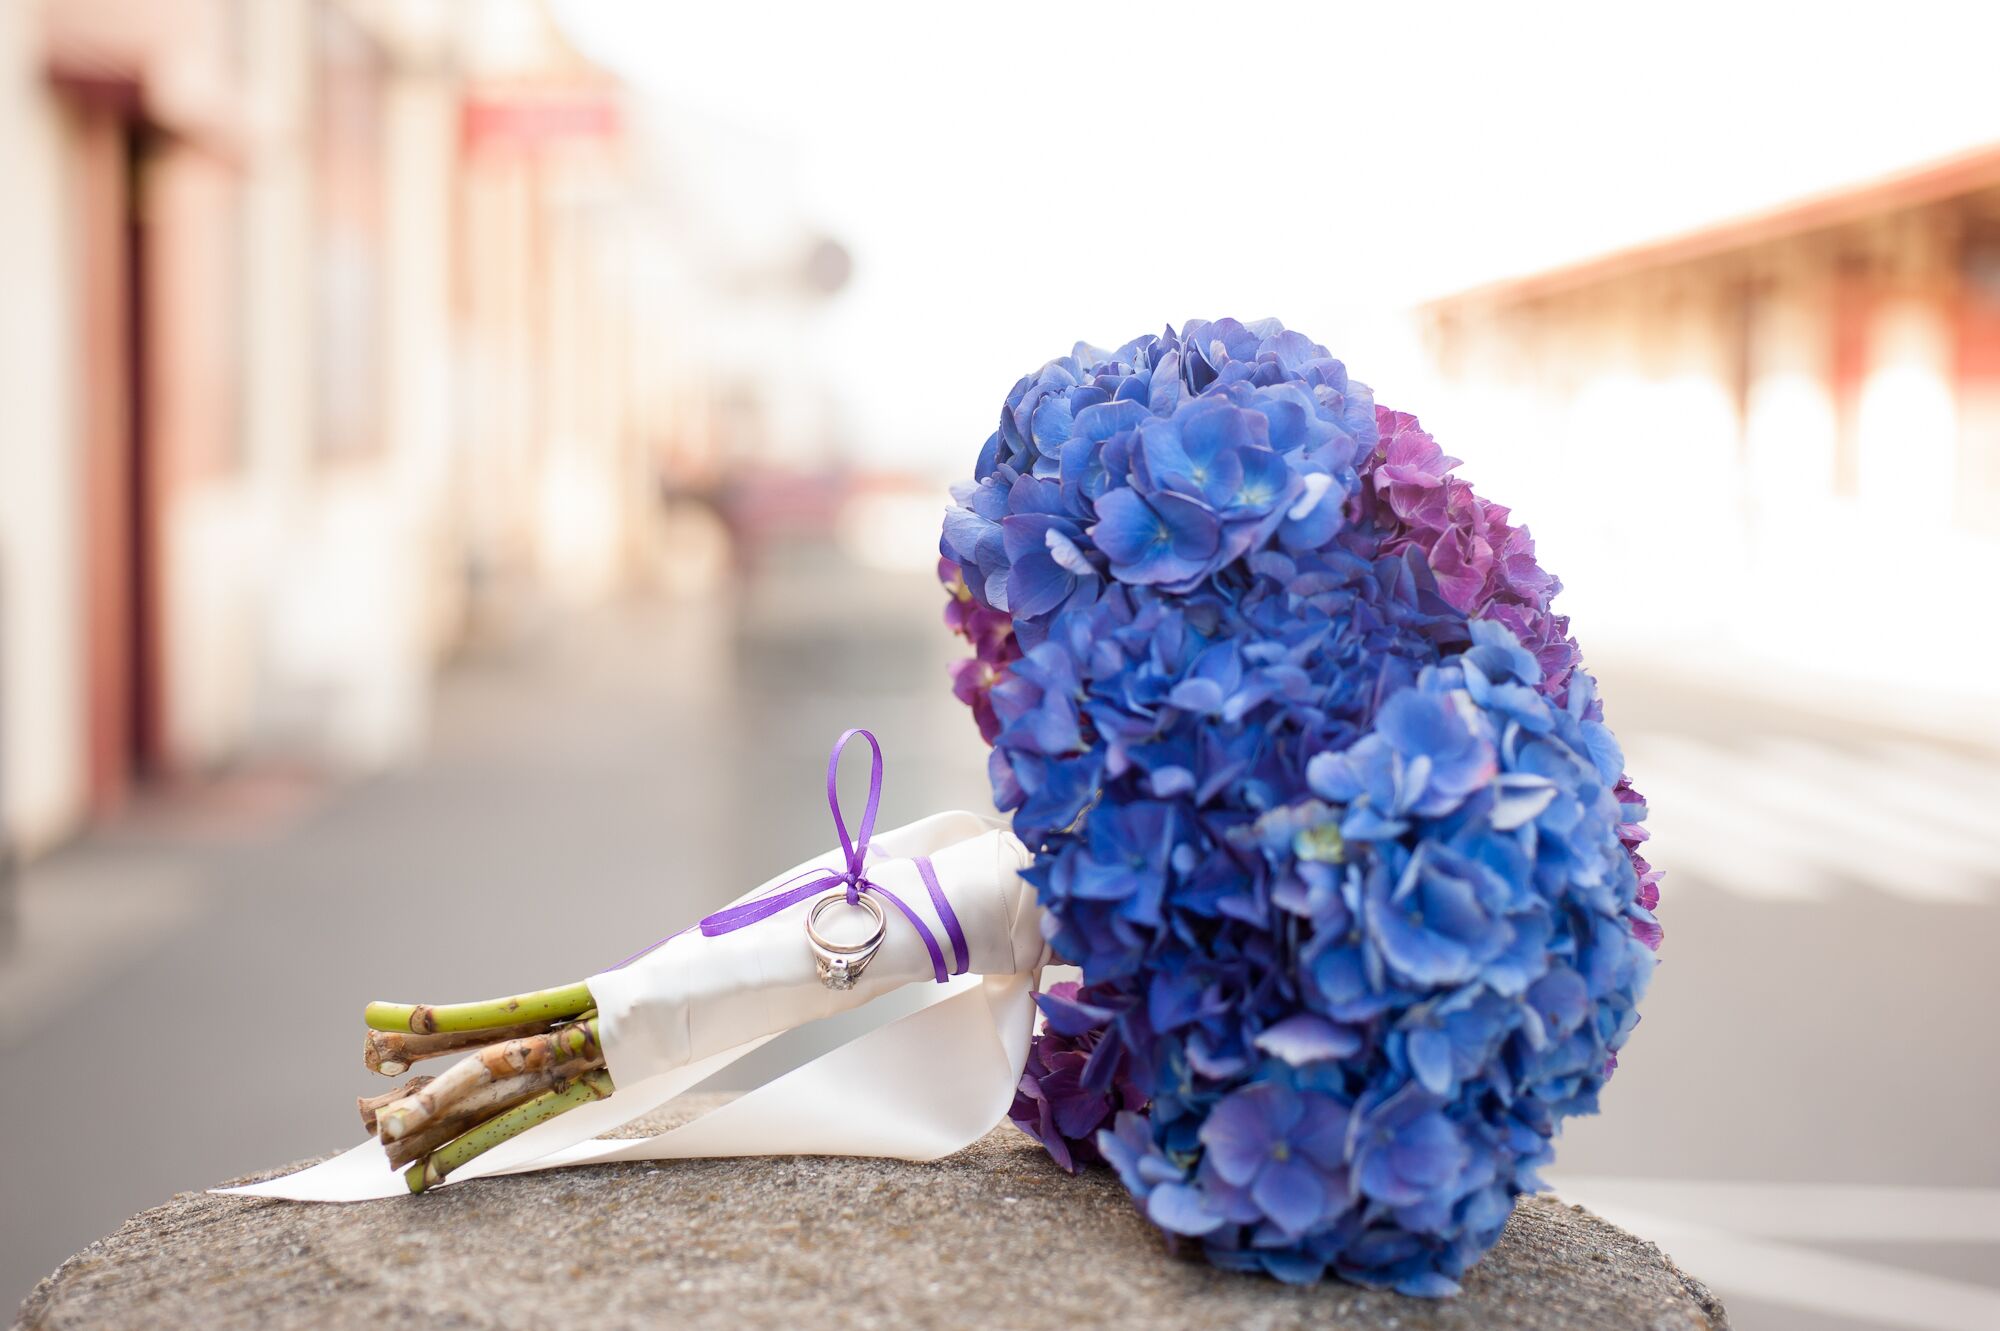 Image of Bouquet of blue and purple hydrangeas